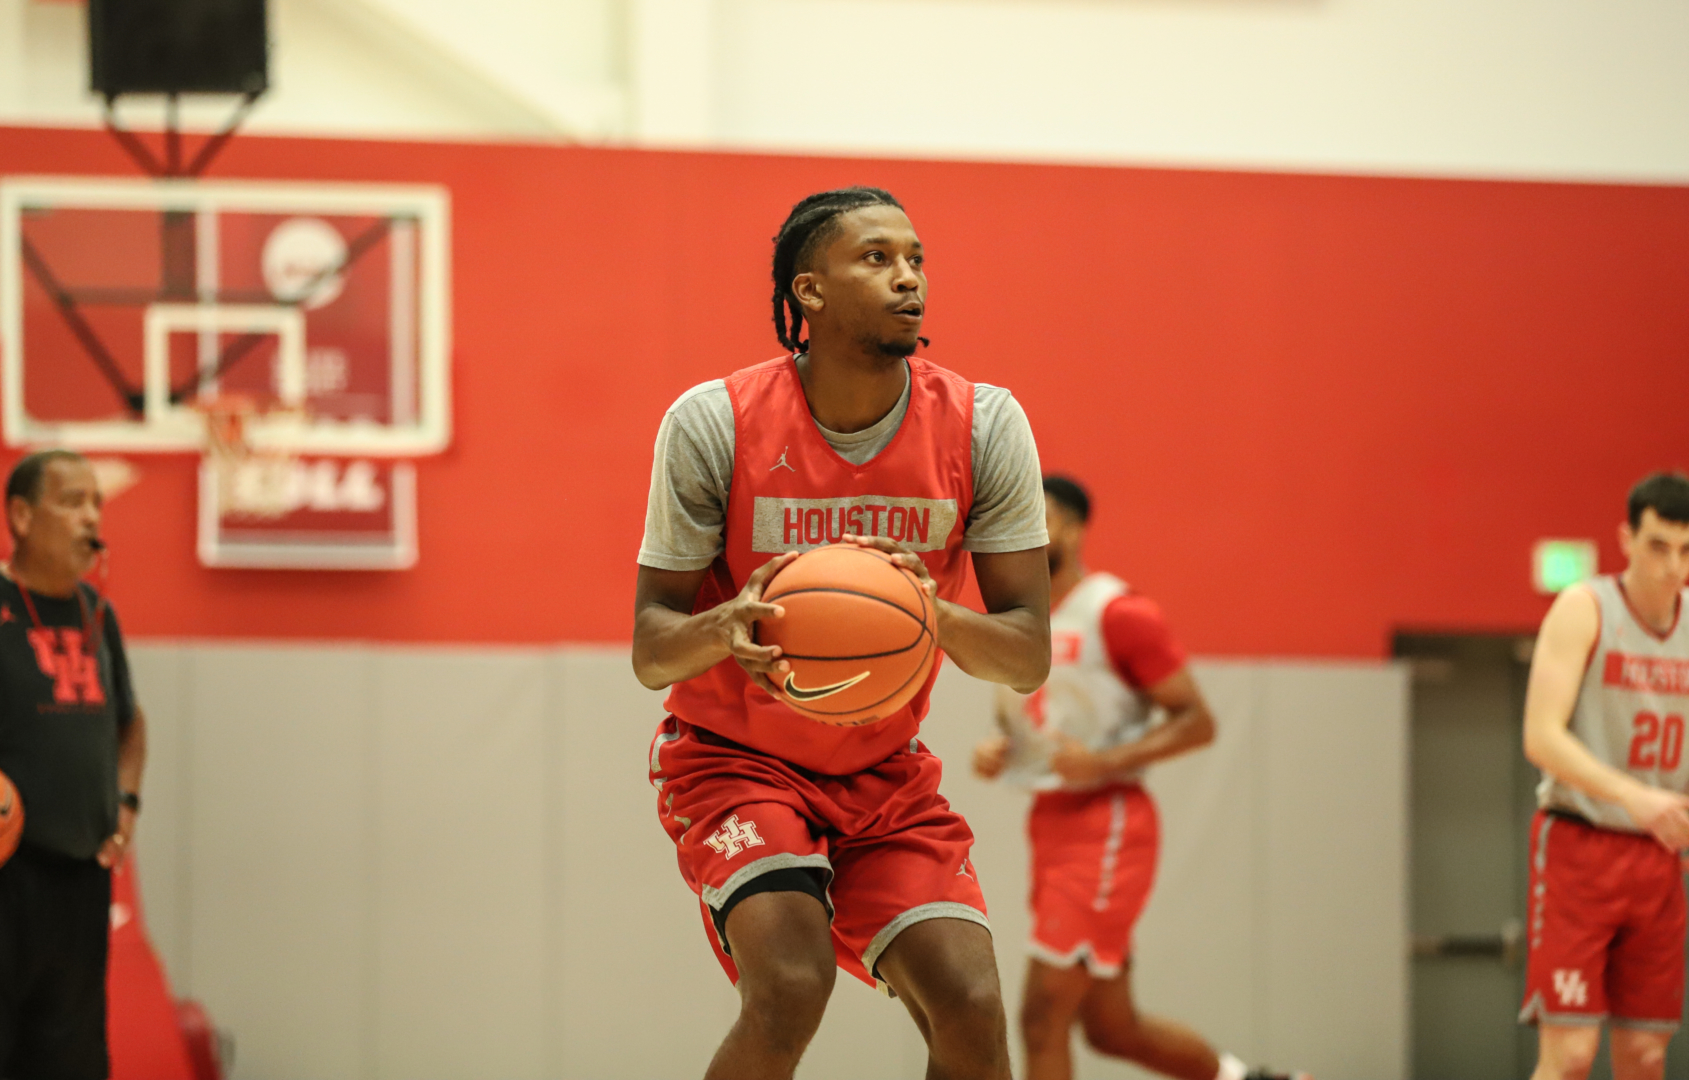 UH guard Tramon Mark goes through a shooting drill during a practice. | Sean Thomas/The Cougar